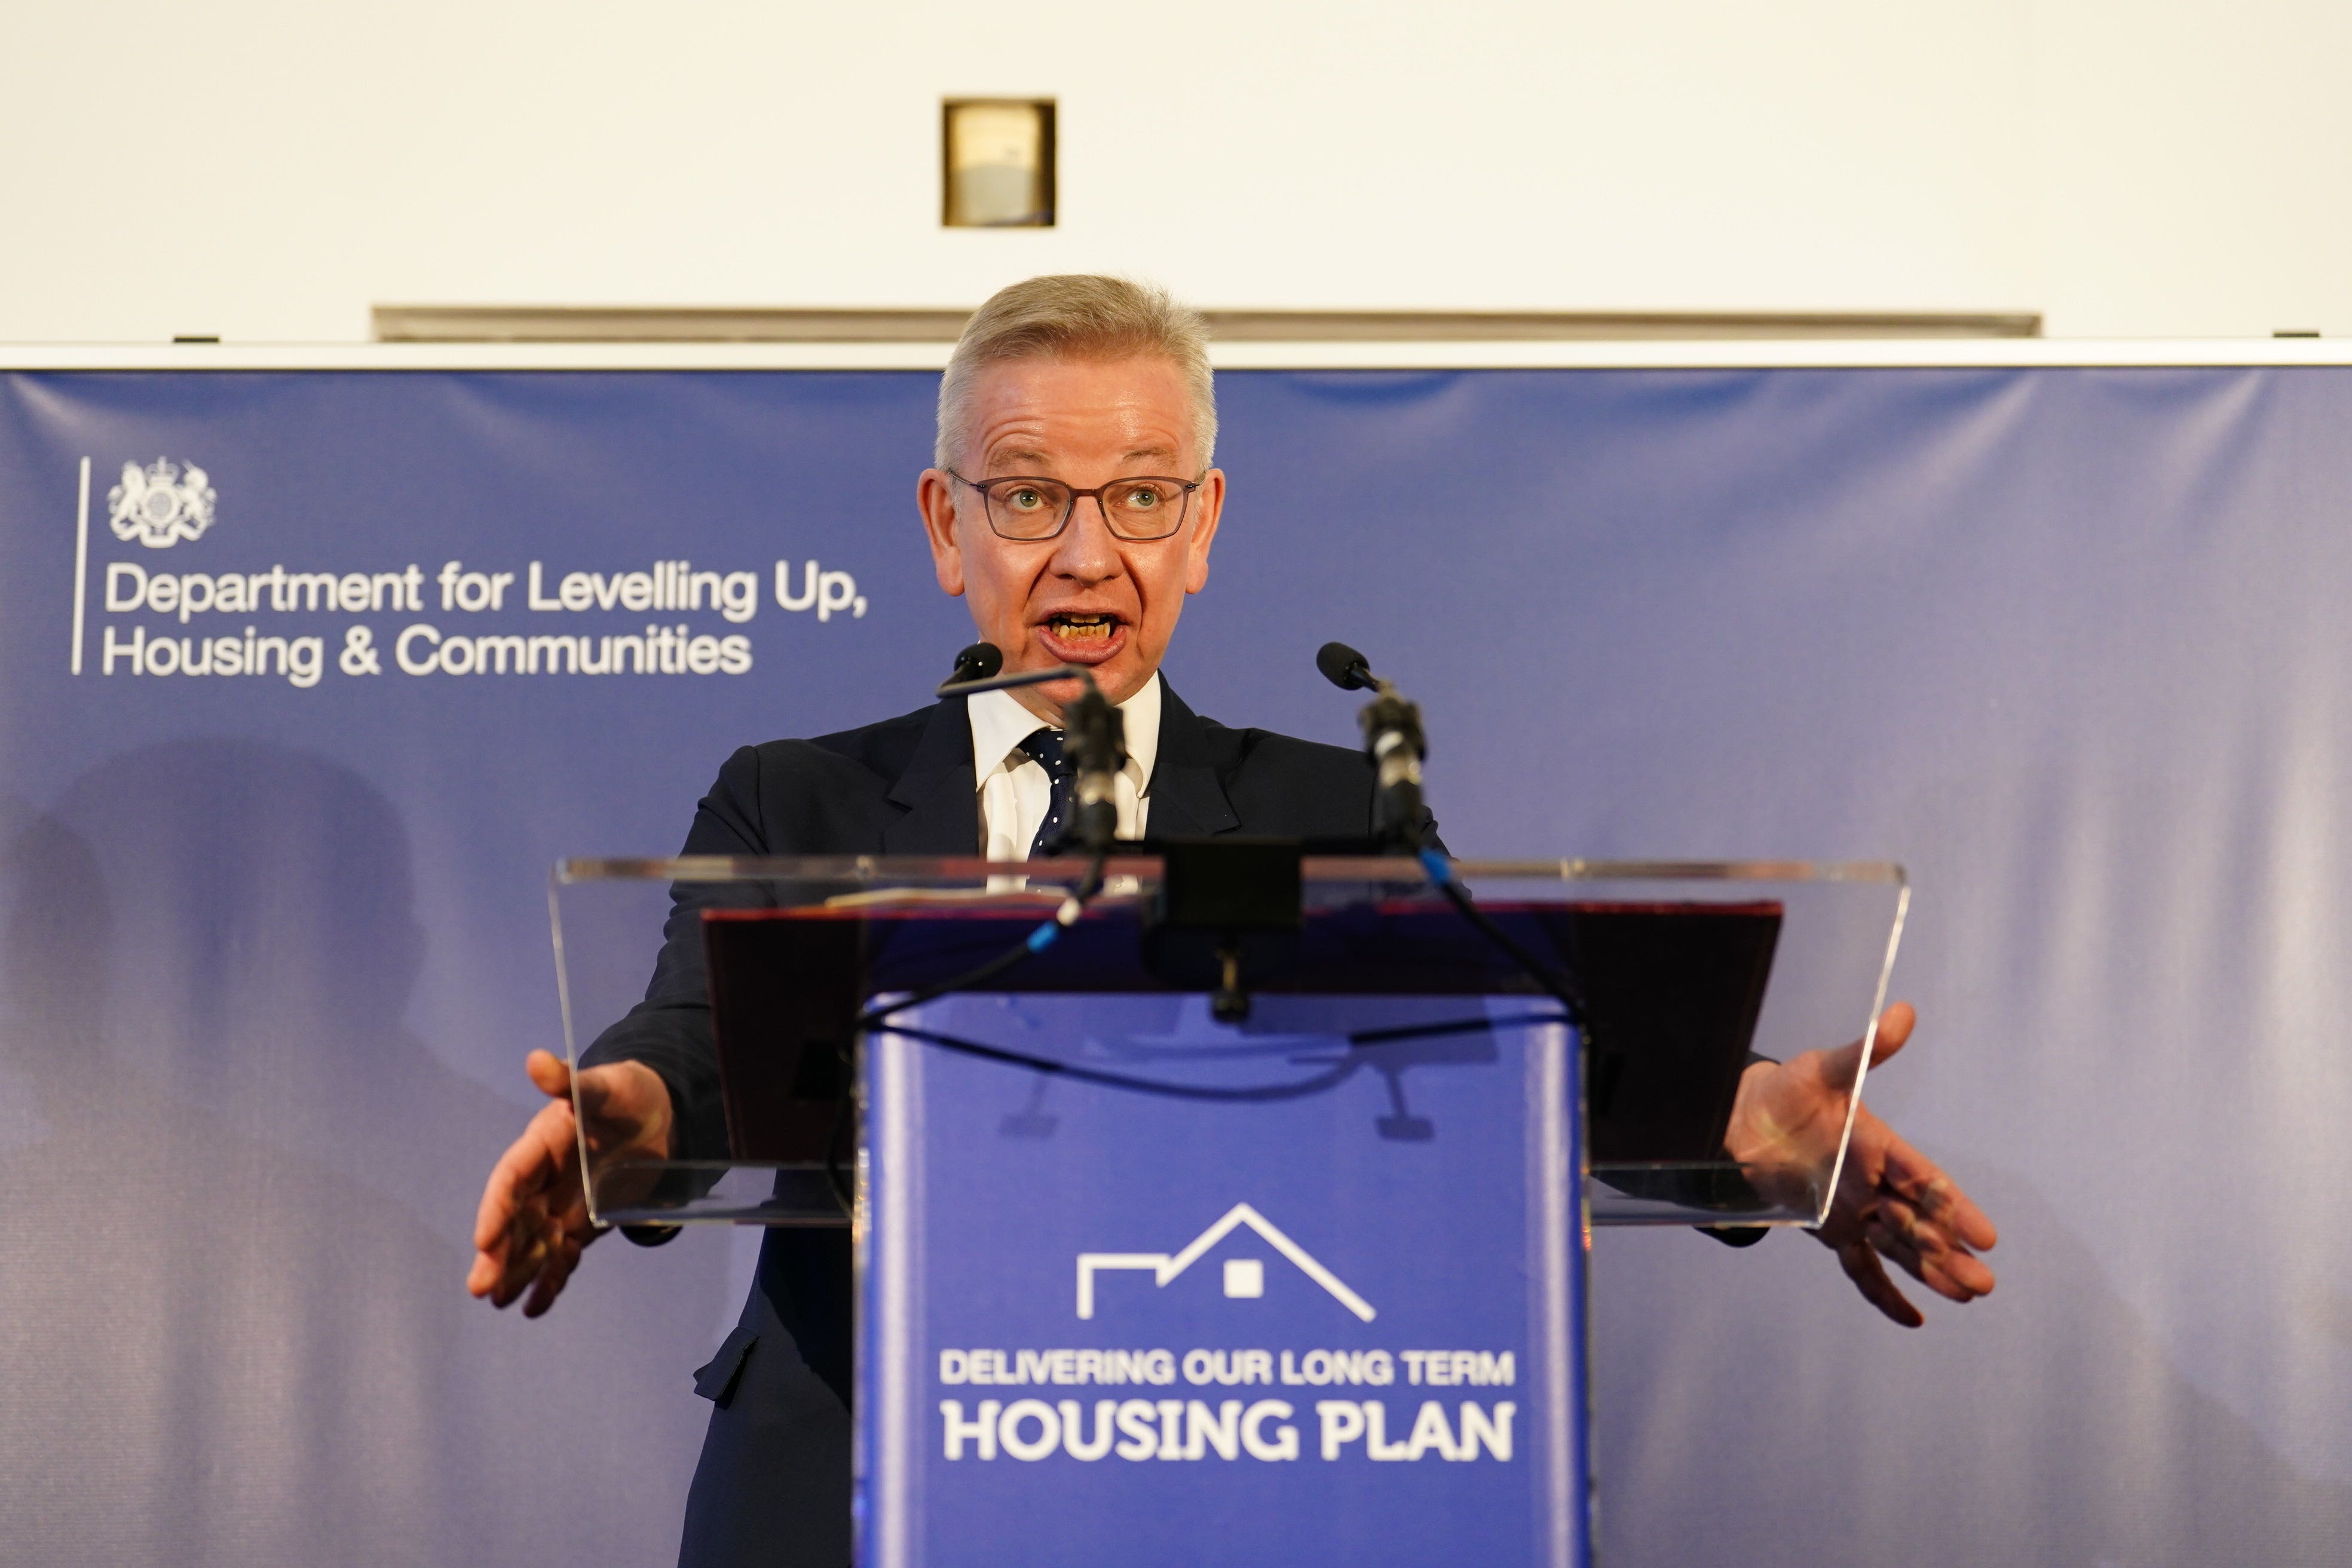 Housing secretary Michael Gove’s assertions were echoed by other Tory sources